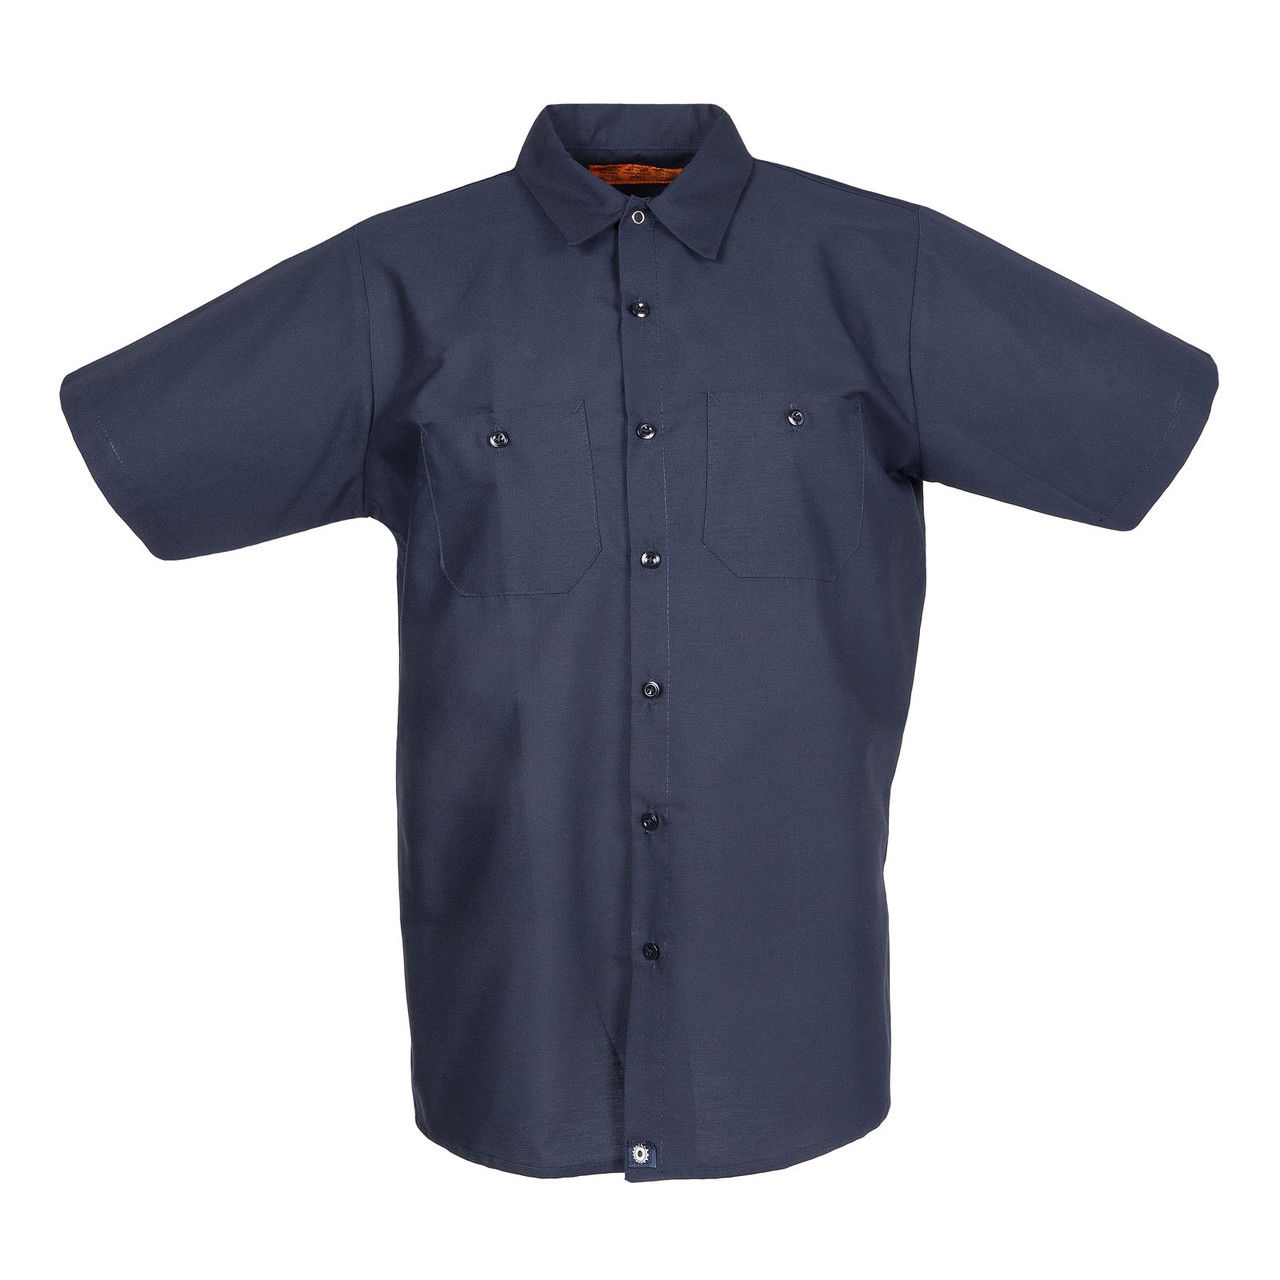 What is the sleeve style and closure type of the men's navy blue short sleeve work shirt?